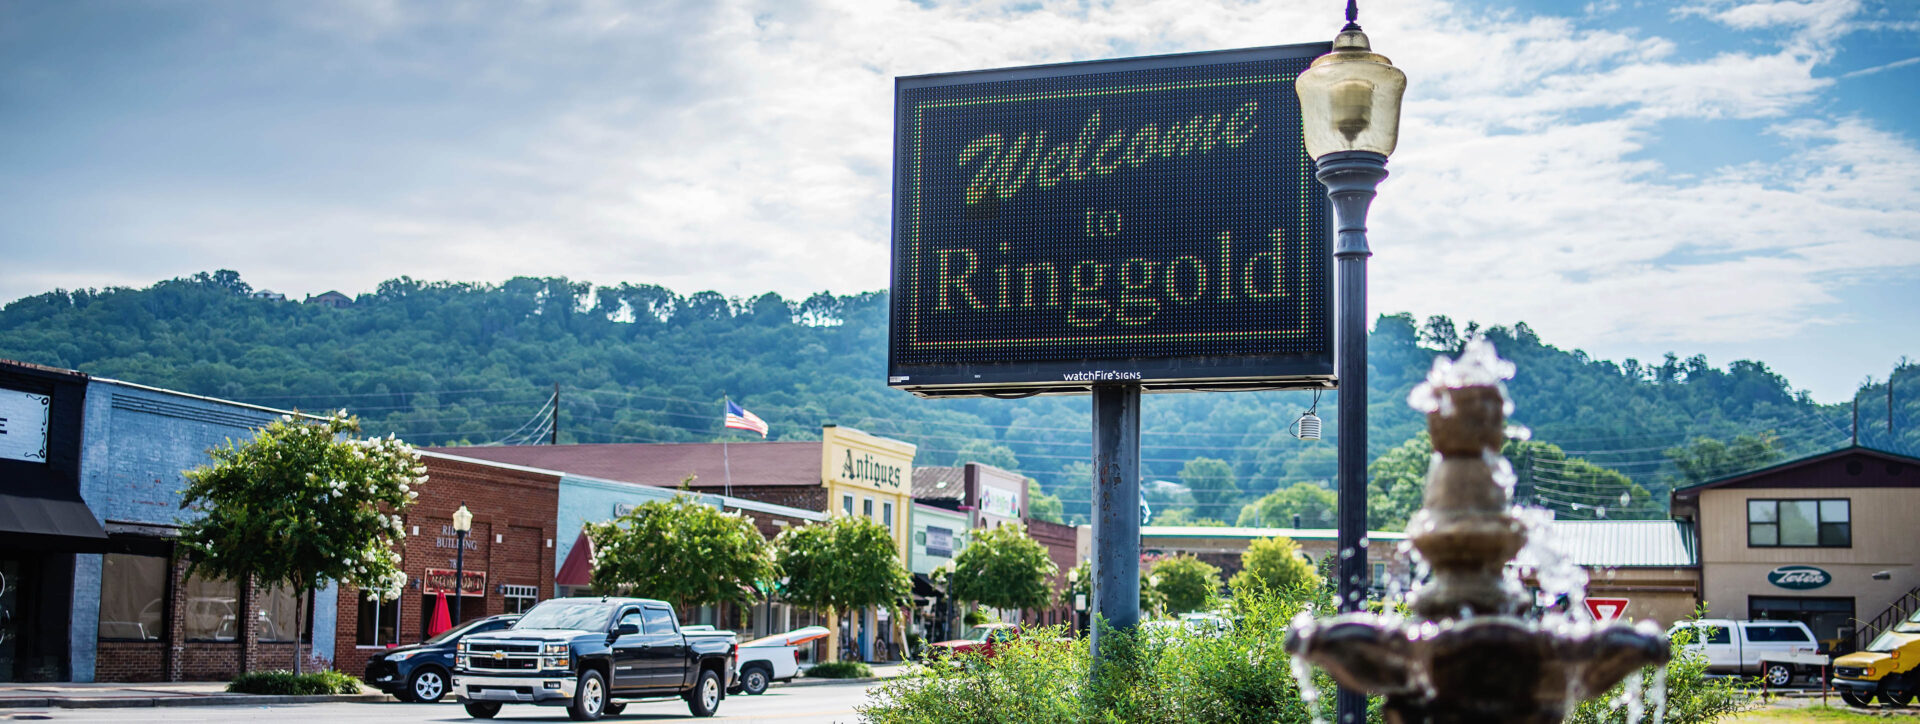 welcome to ringgold sign on skyline